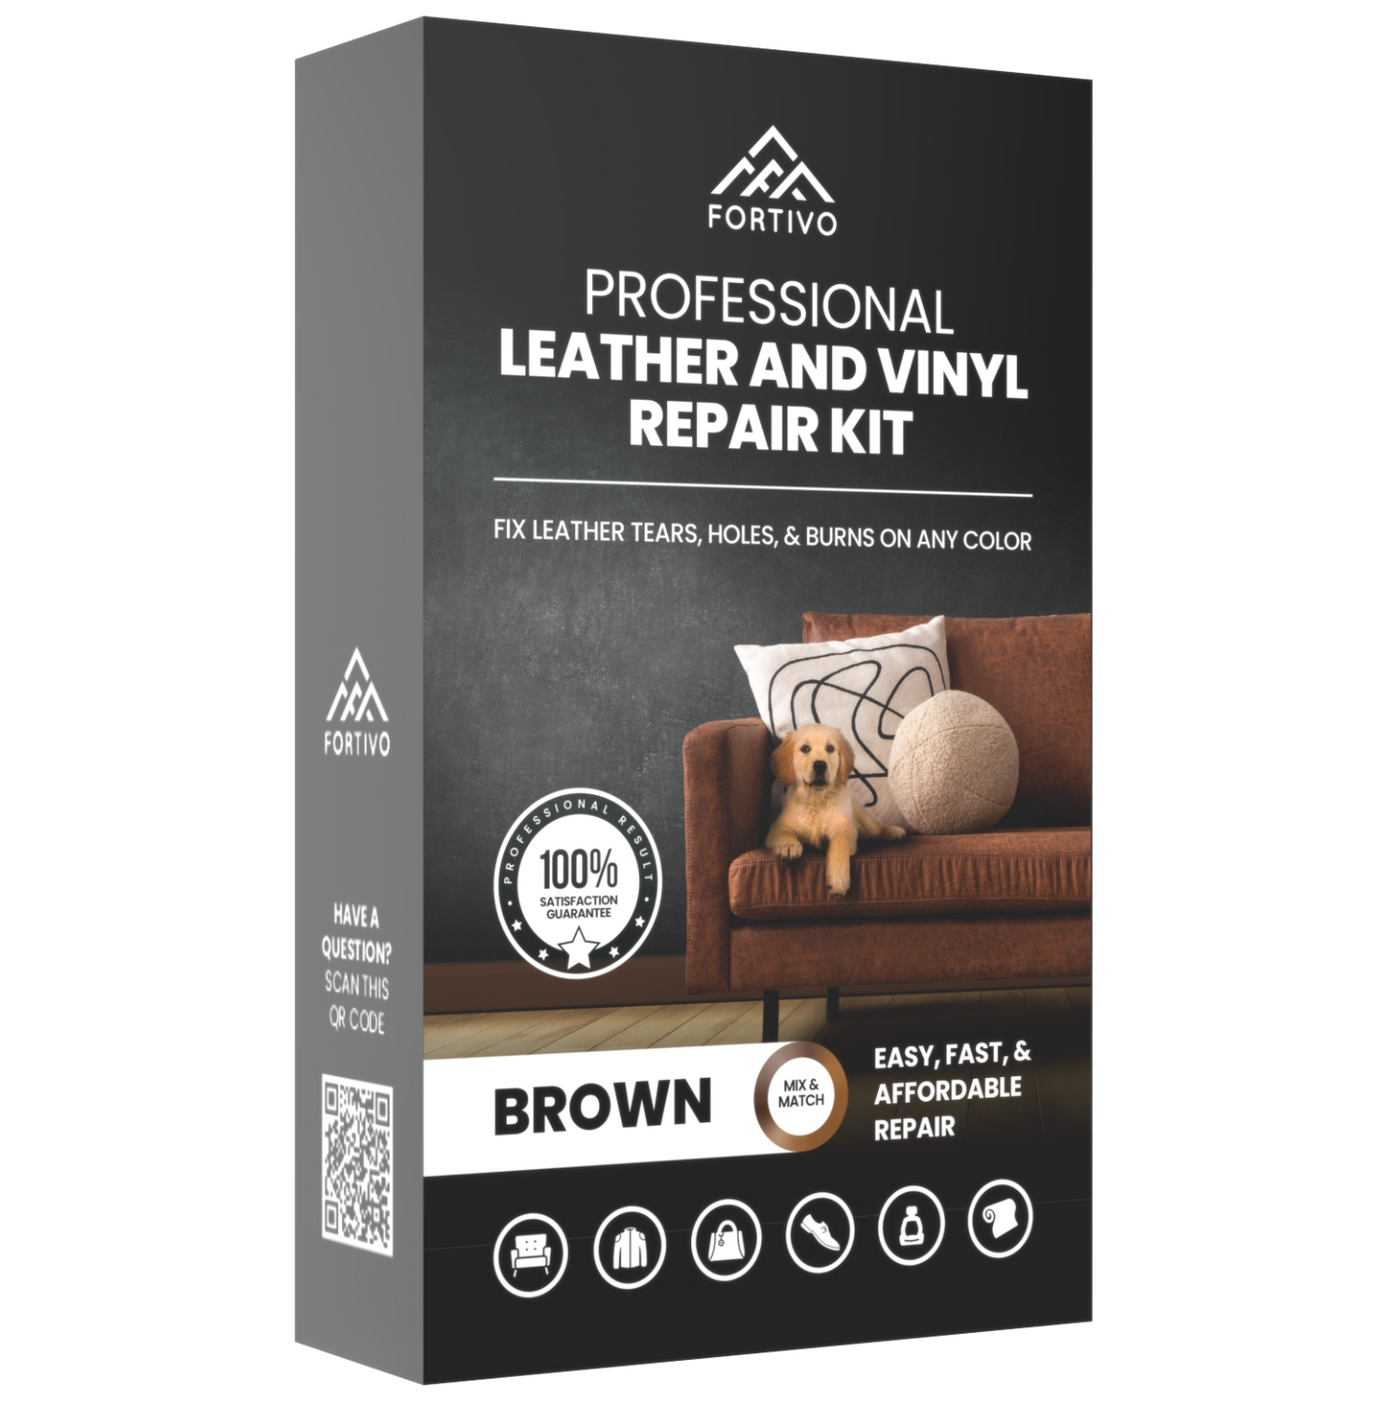 Fortivo Black Leather and Vinyl Repair Kit Furniture, Couch, Car Seats, Sofa, Jacket